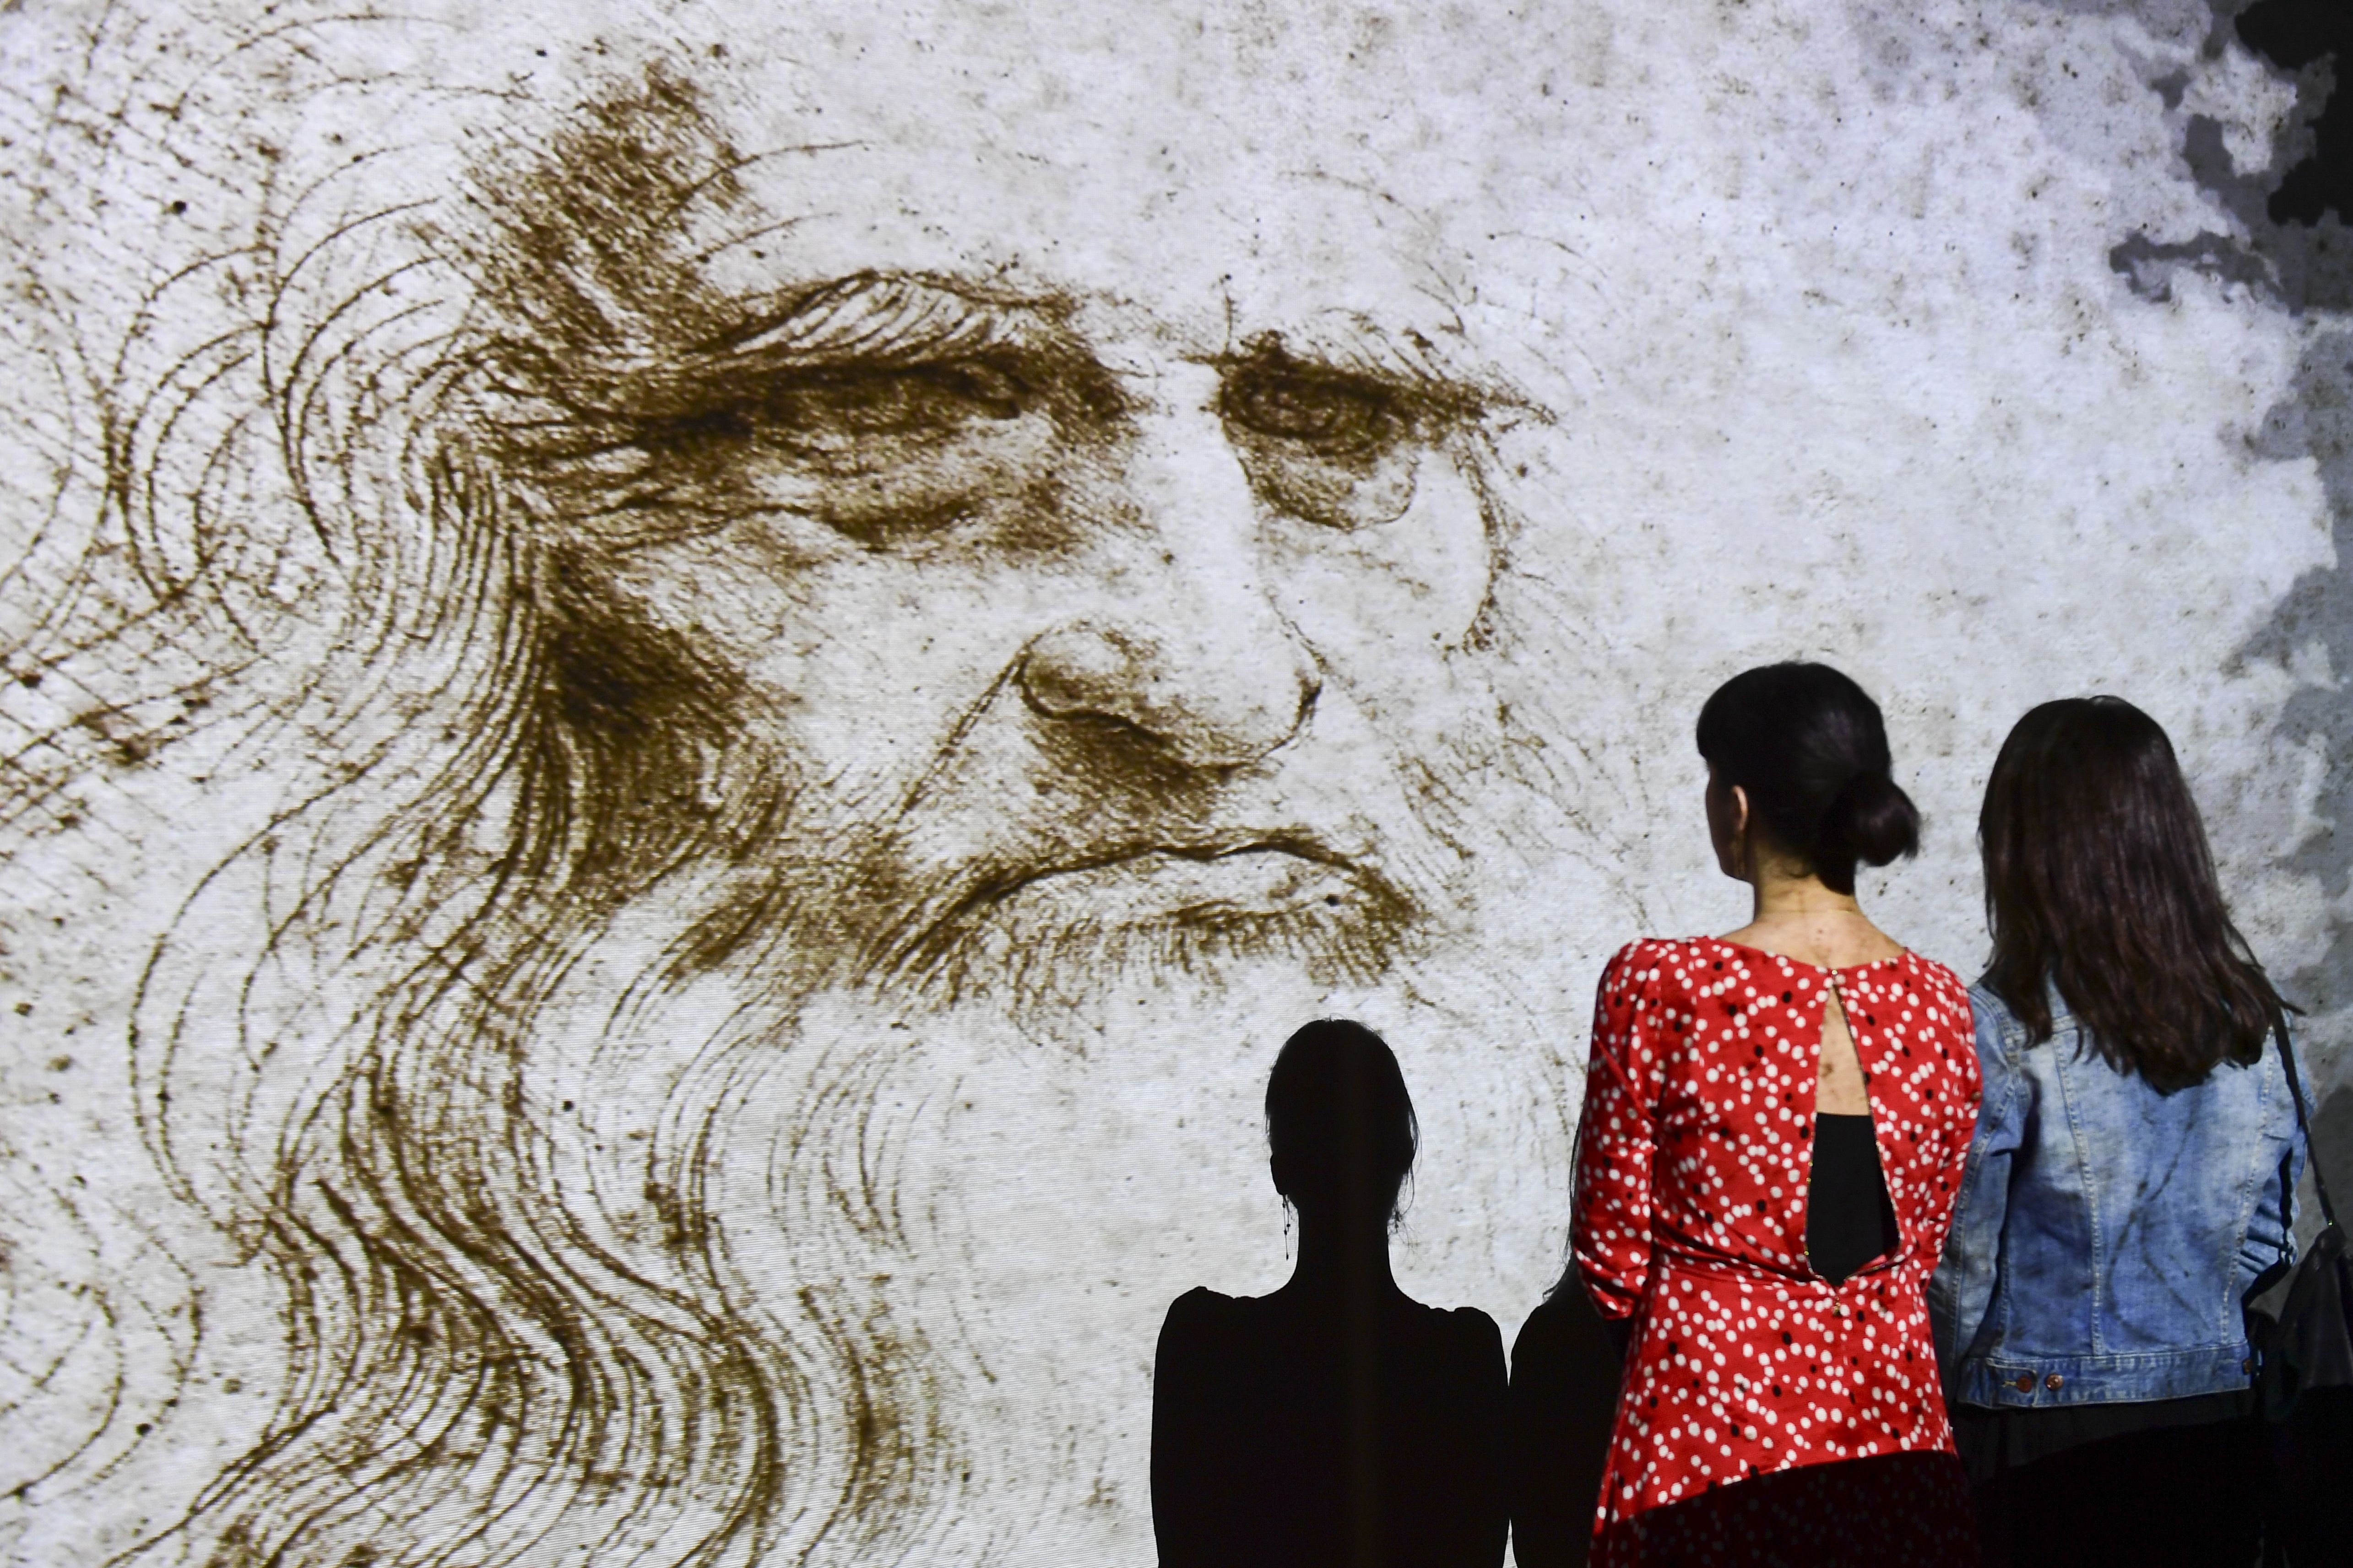 Leonardo Da Vinci's of gravity was 'centuries ahead of his time', study says | The Independent